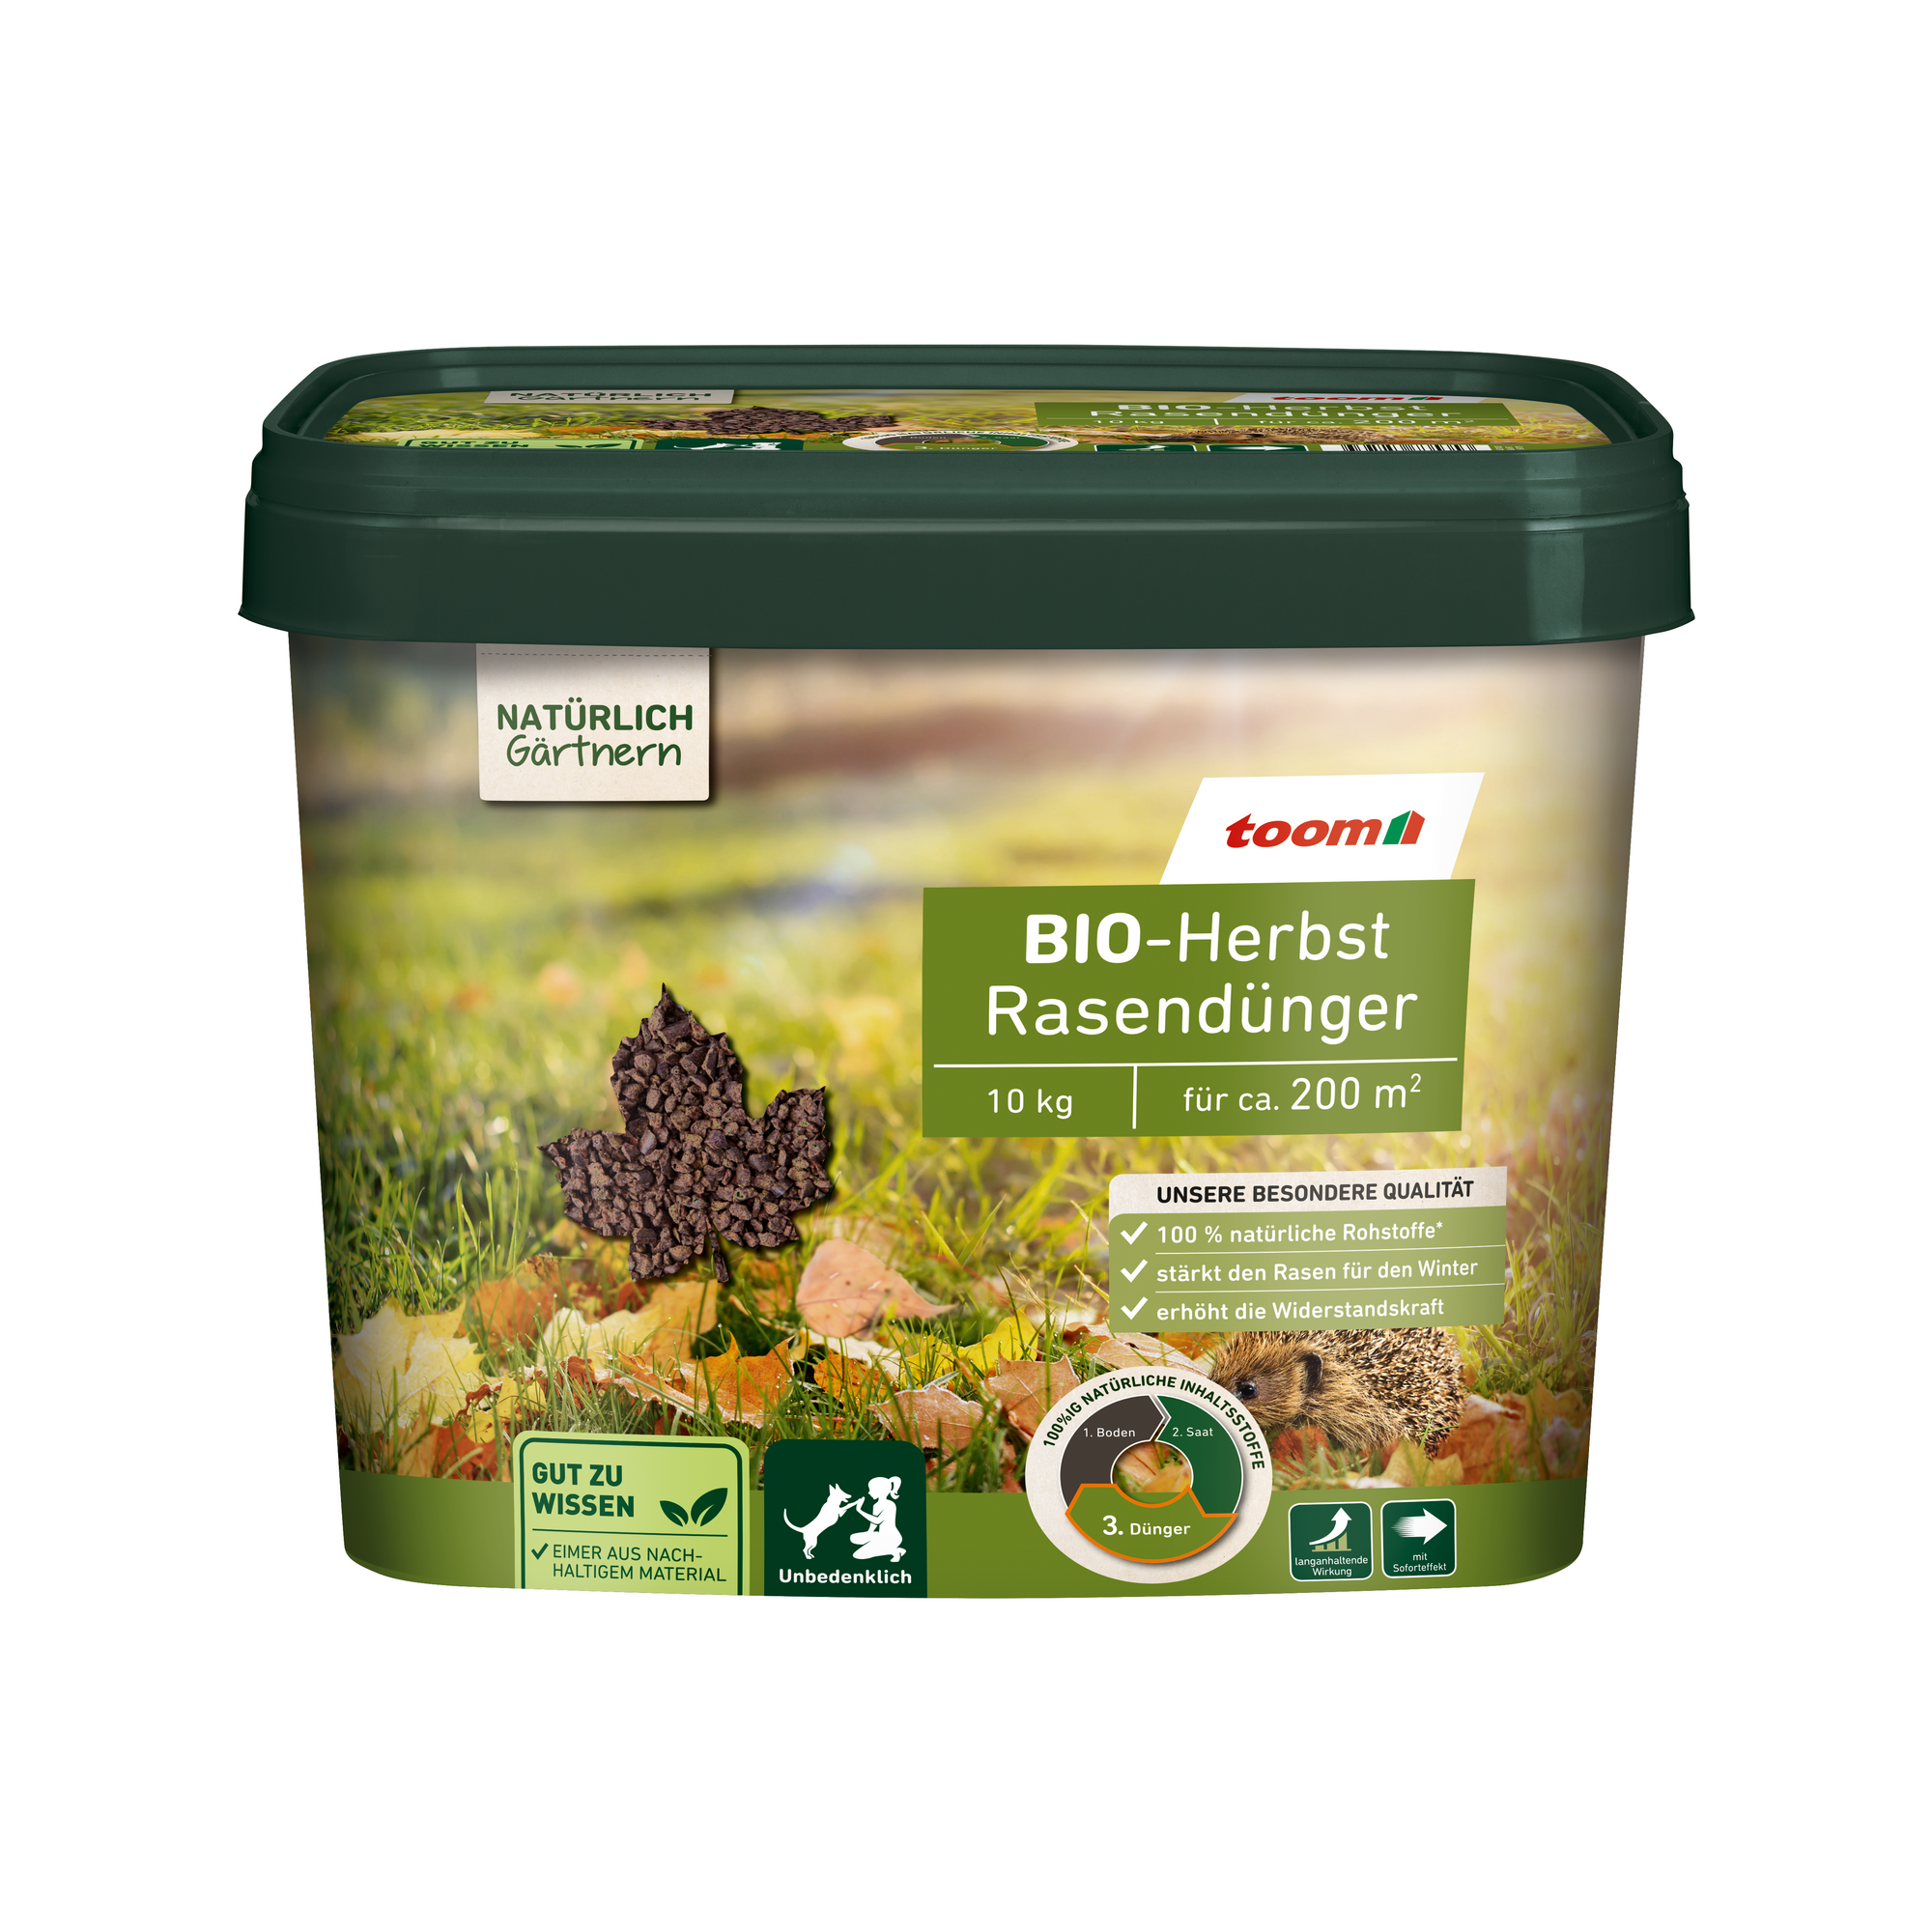 Bio-Herbstrasendünger 10 kg + product picture